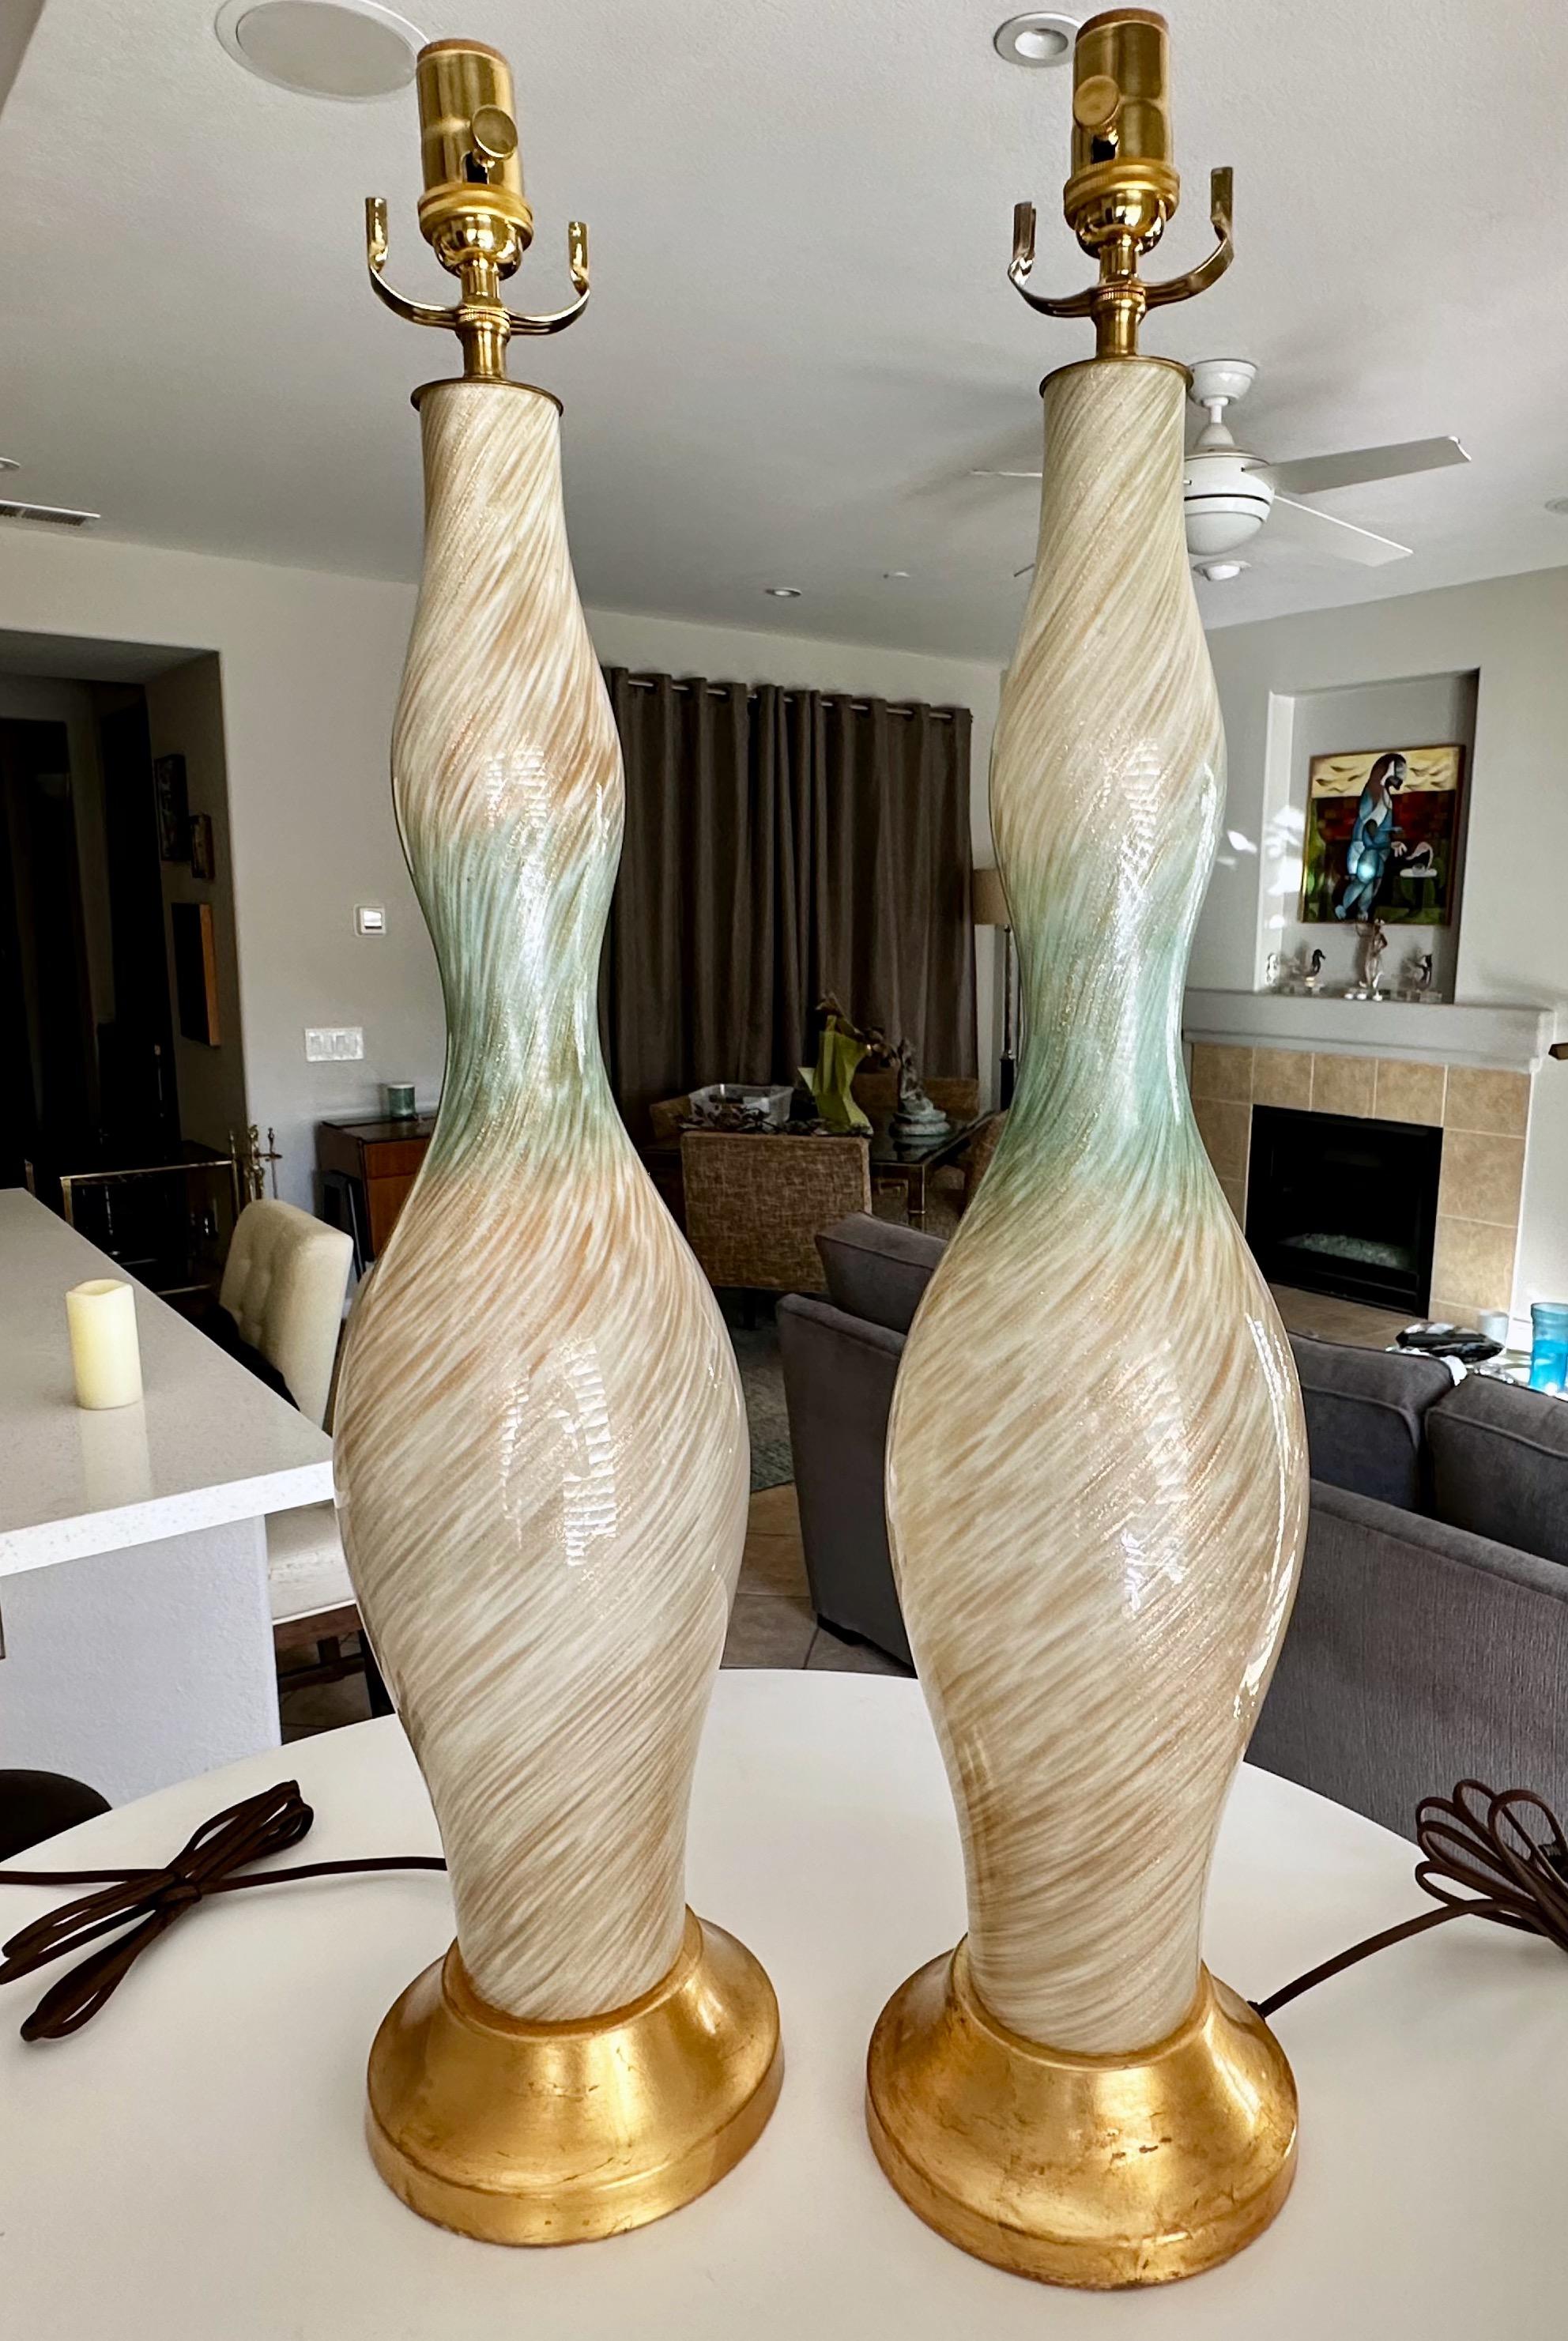 Pair of tall Murano Italian mid century hand blown cased white and splash of light blue table lamps. The glass bodies are covered with swirls of striped copper adventurine, resting on gilt metal bases. Newly wired with new brass 3 way dimmer sockets